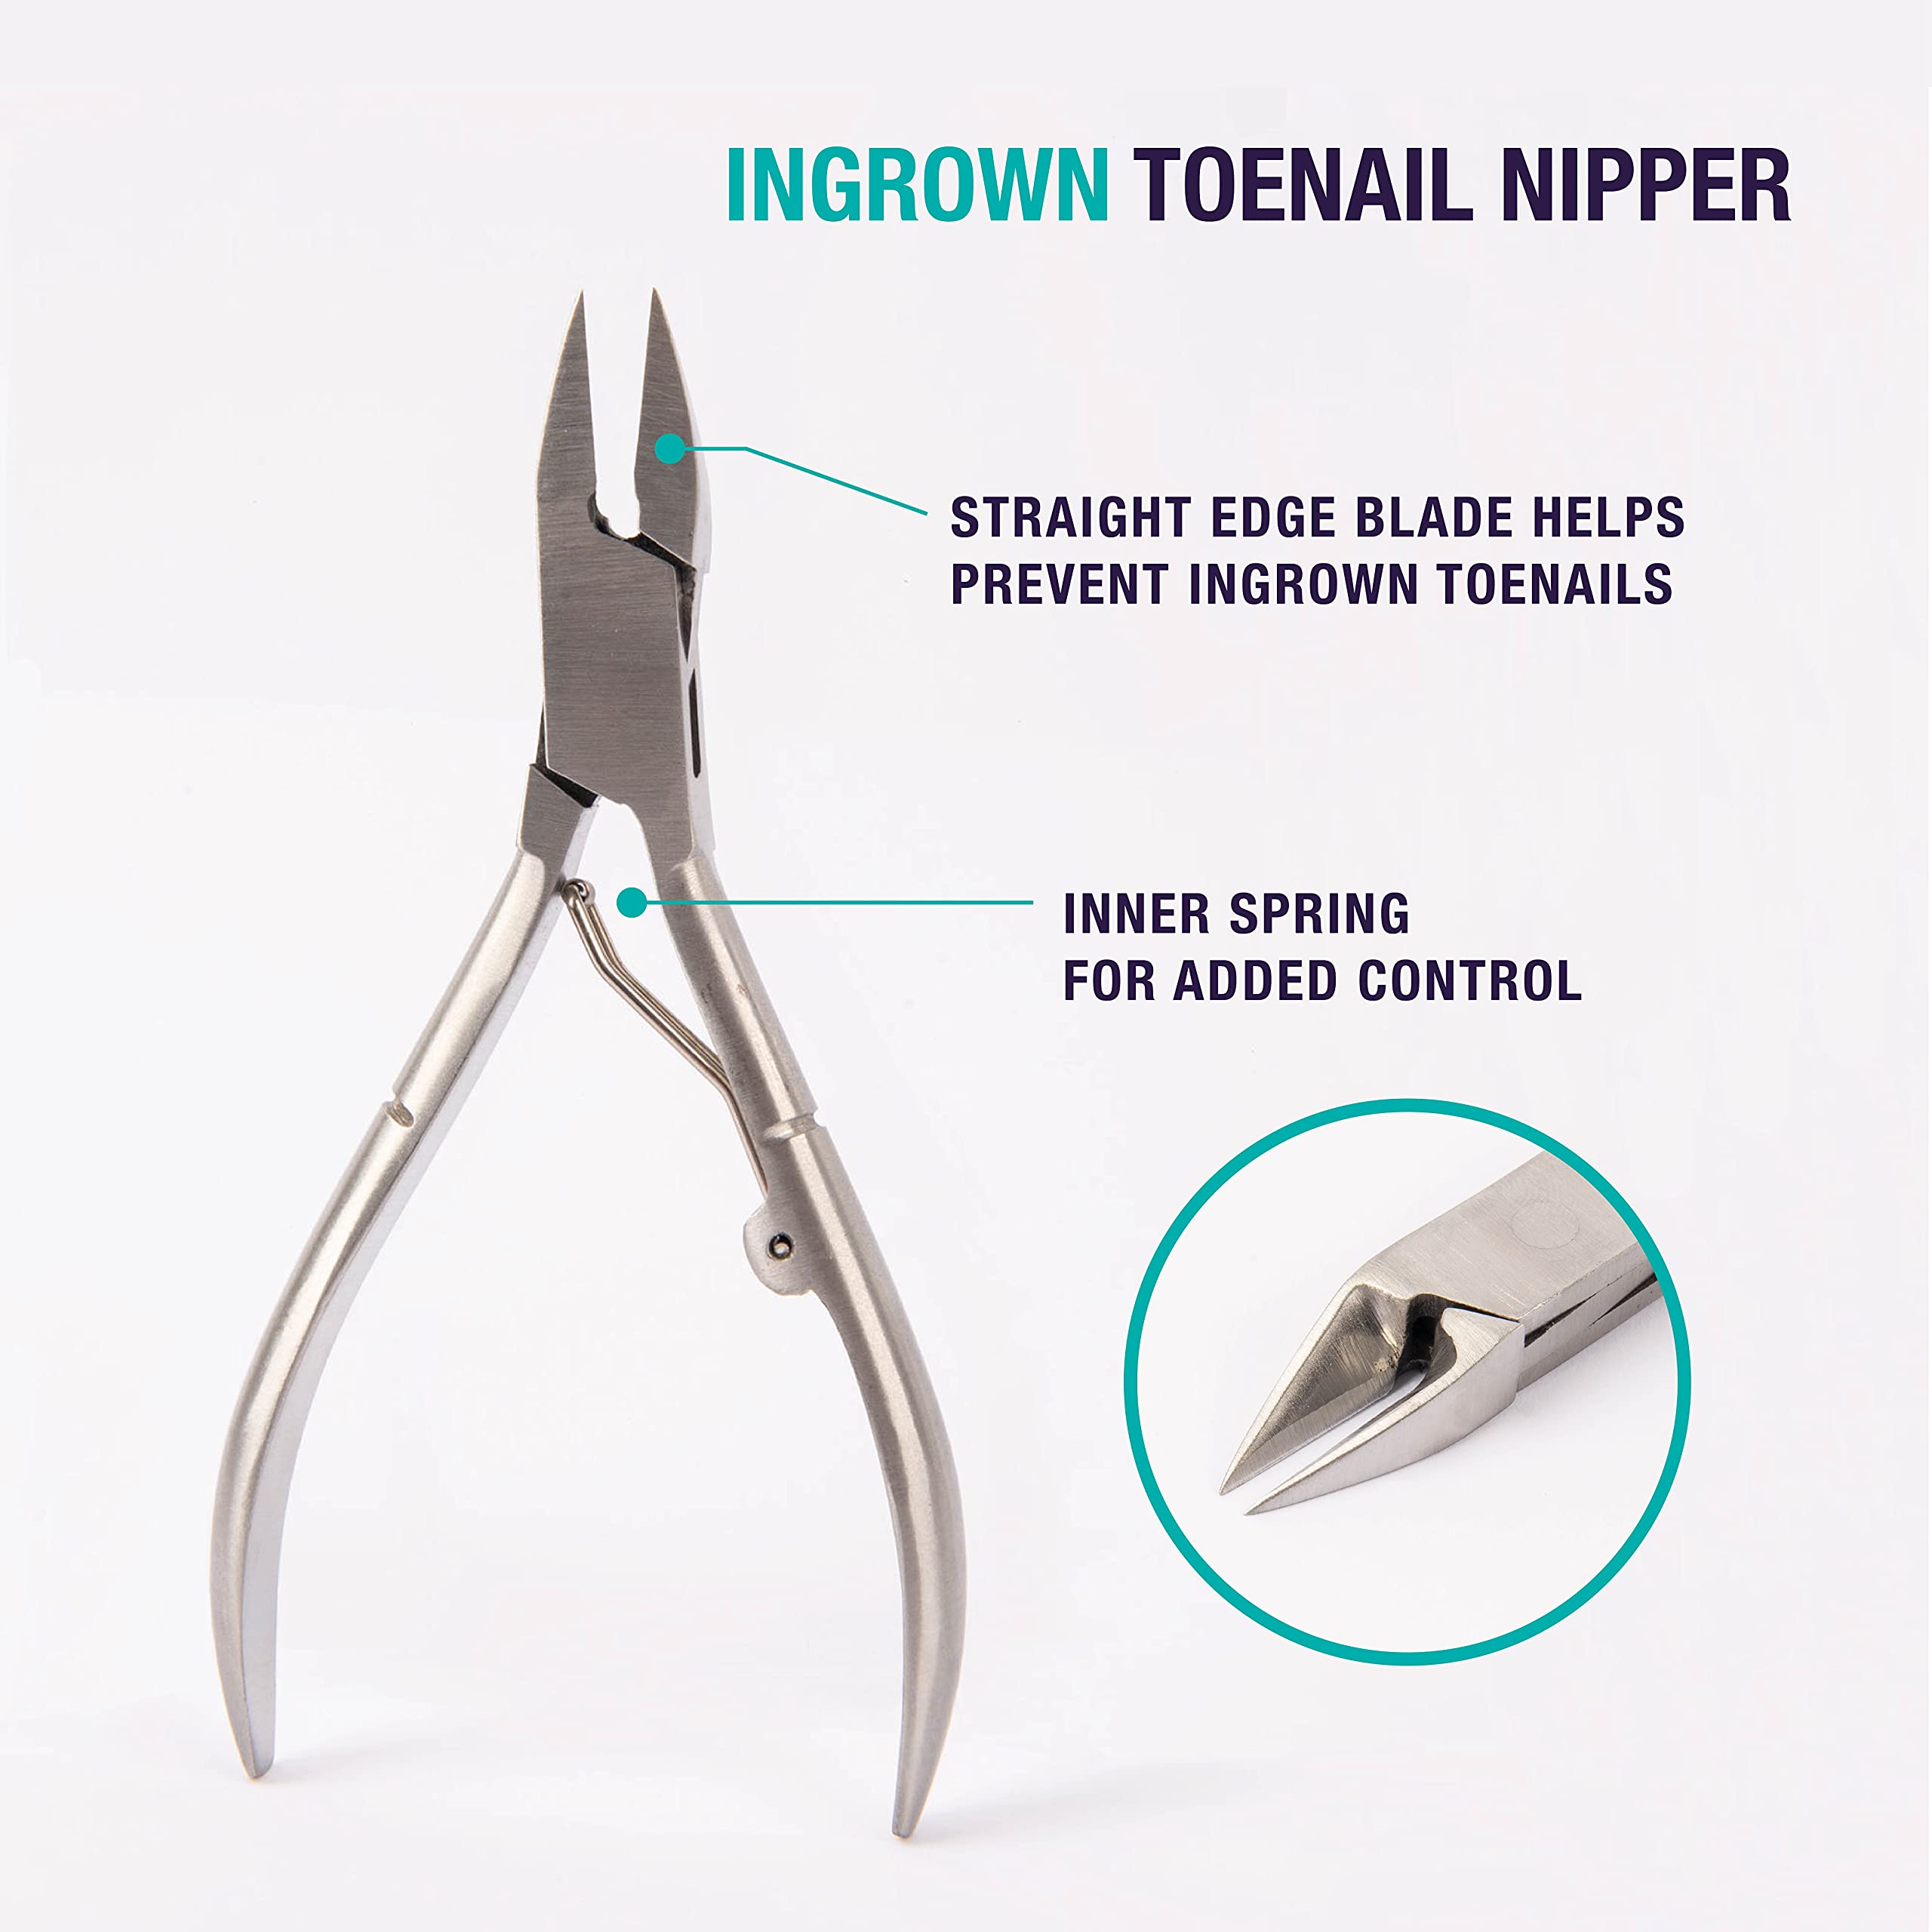 TRIM Simply Foot Ingrown Toenail Kit – Includes Stainless Steel Toenail Nipper and Stainless Steel Dual-Ended File – Easy to Use Foot Care Tools – for Men and Women – Silver – 2 Piece Set